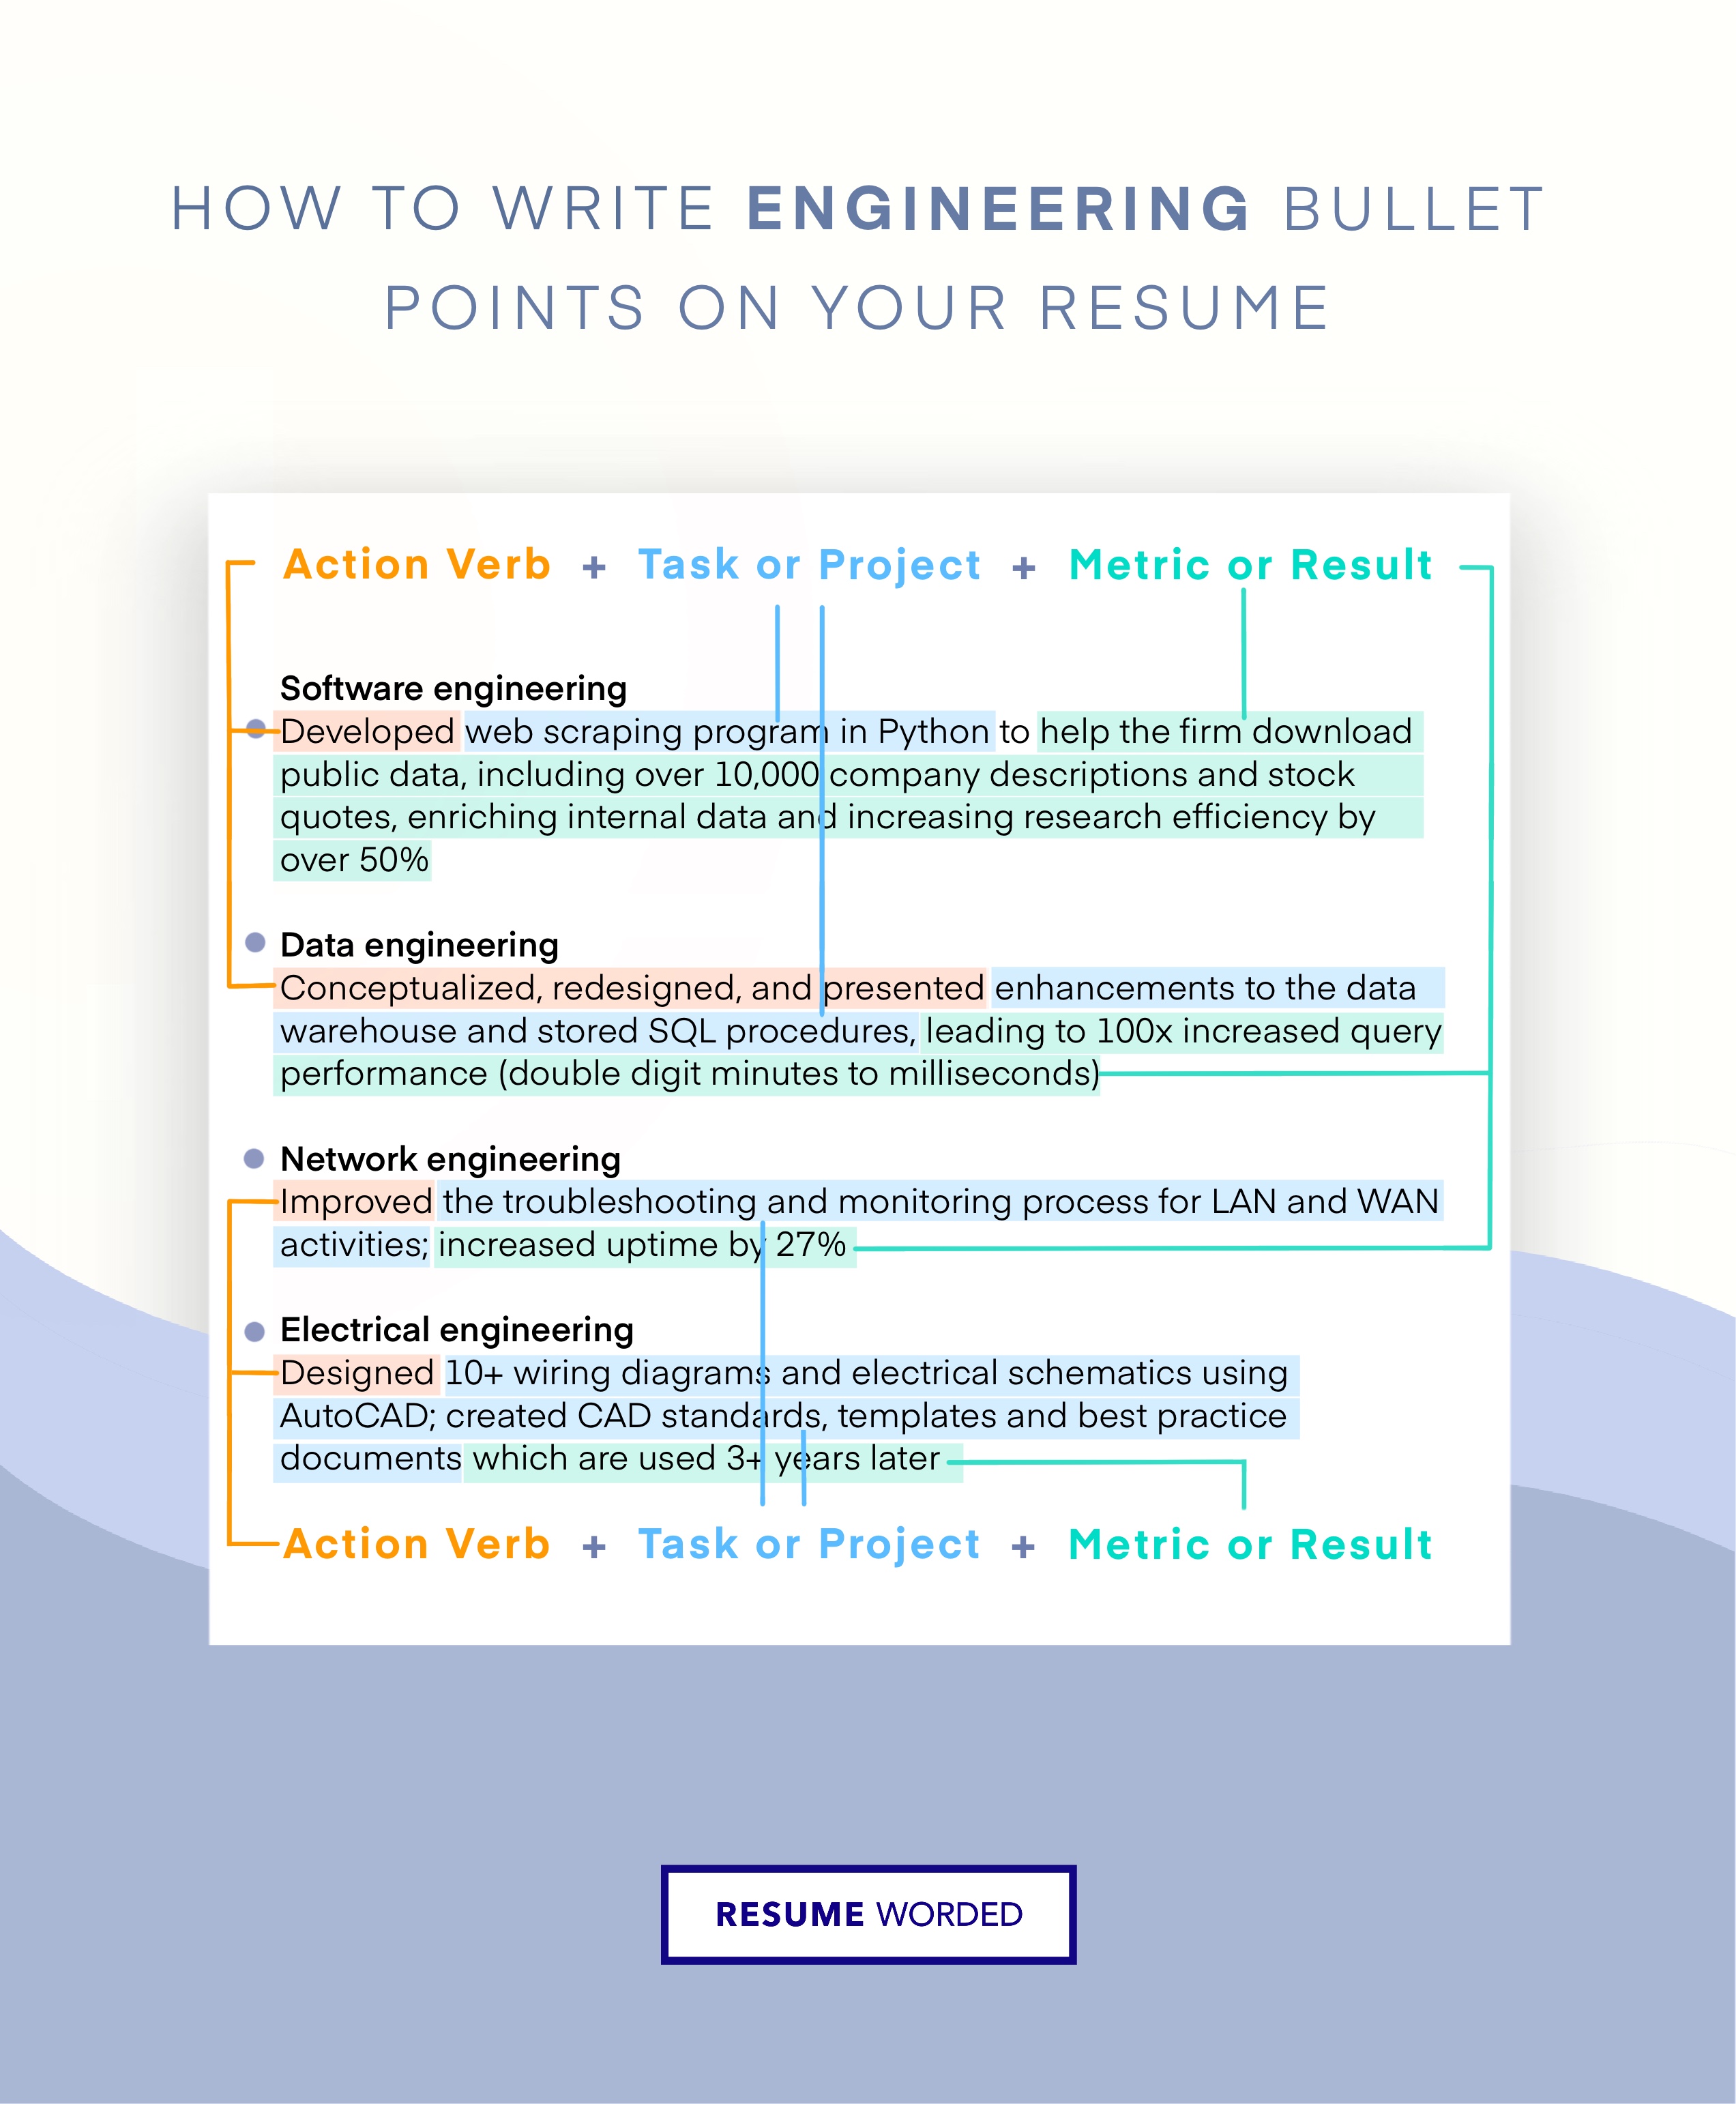 Tailor your resume to the mechanical engineering industry. - Mechanical Safety Engineer  Resume